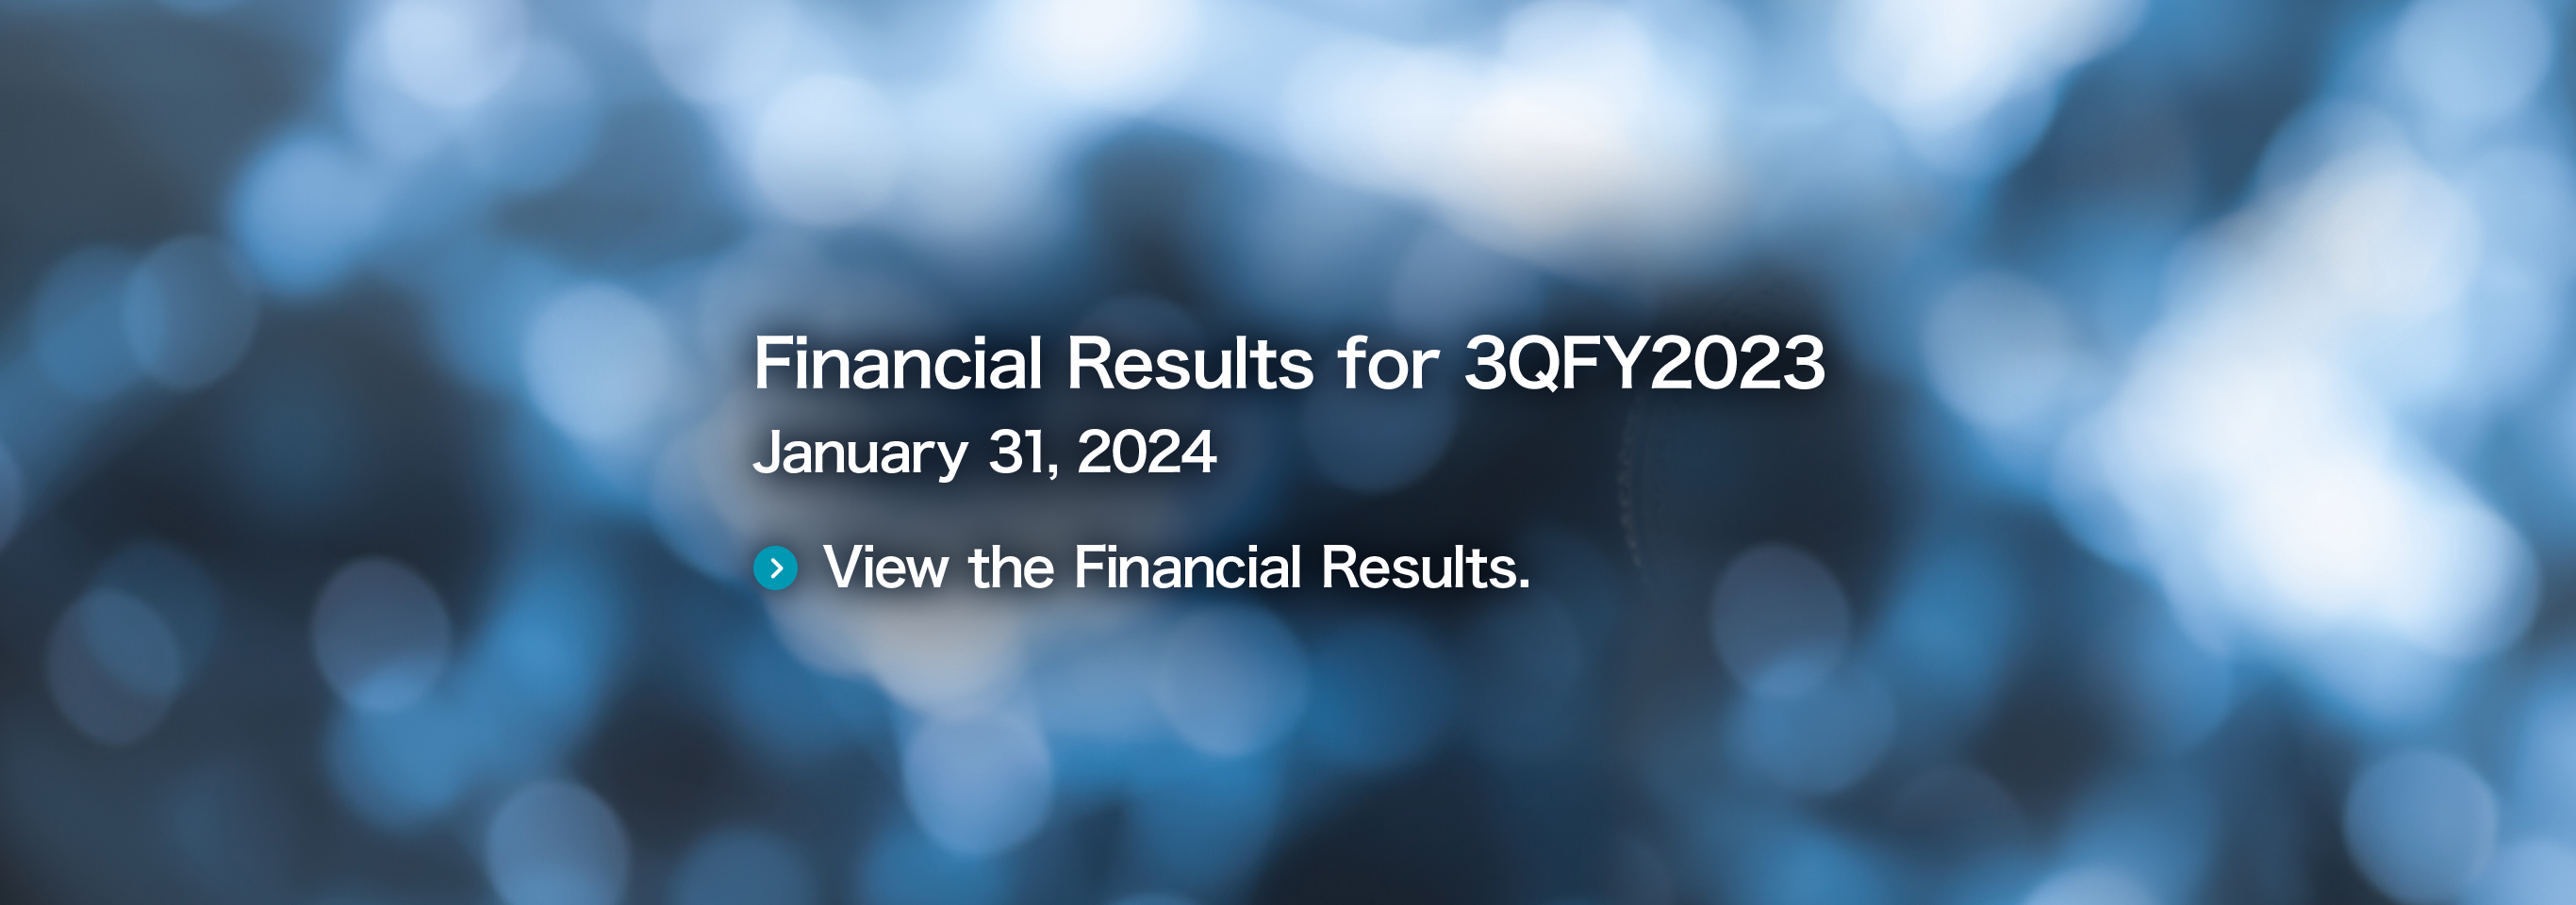 Financial Results for 1QFY2022 July 28, 2022 View the Financial Results.